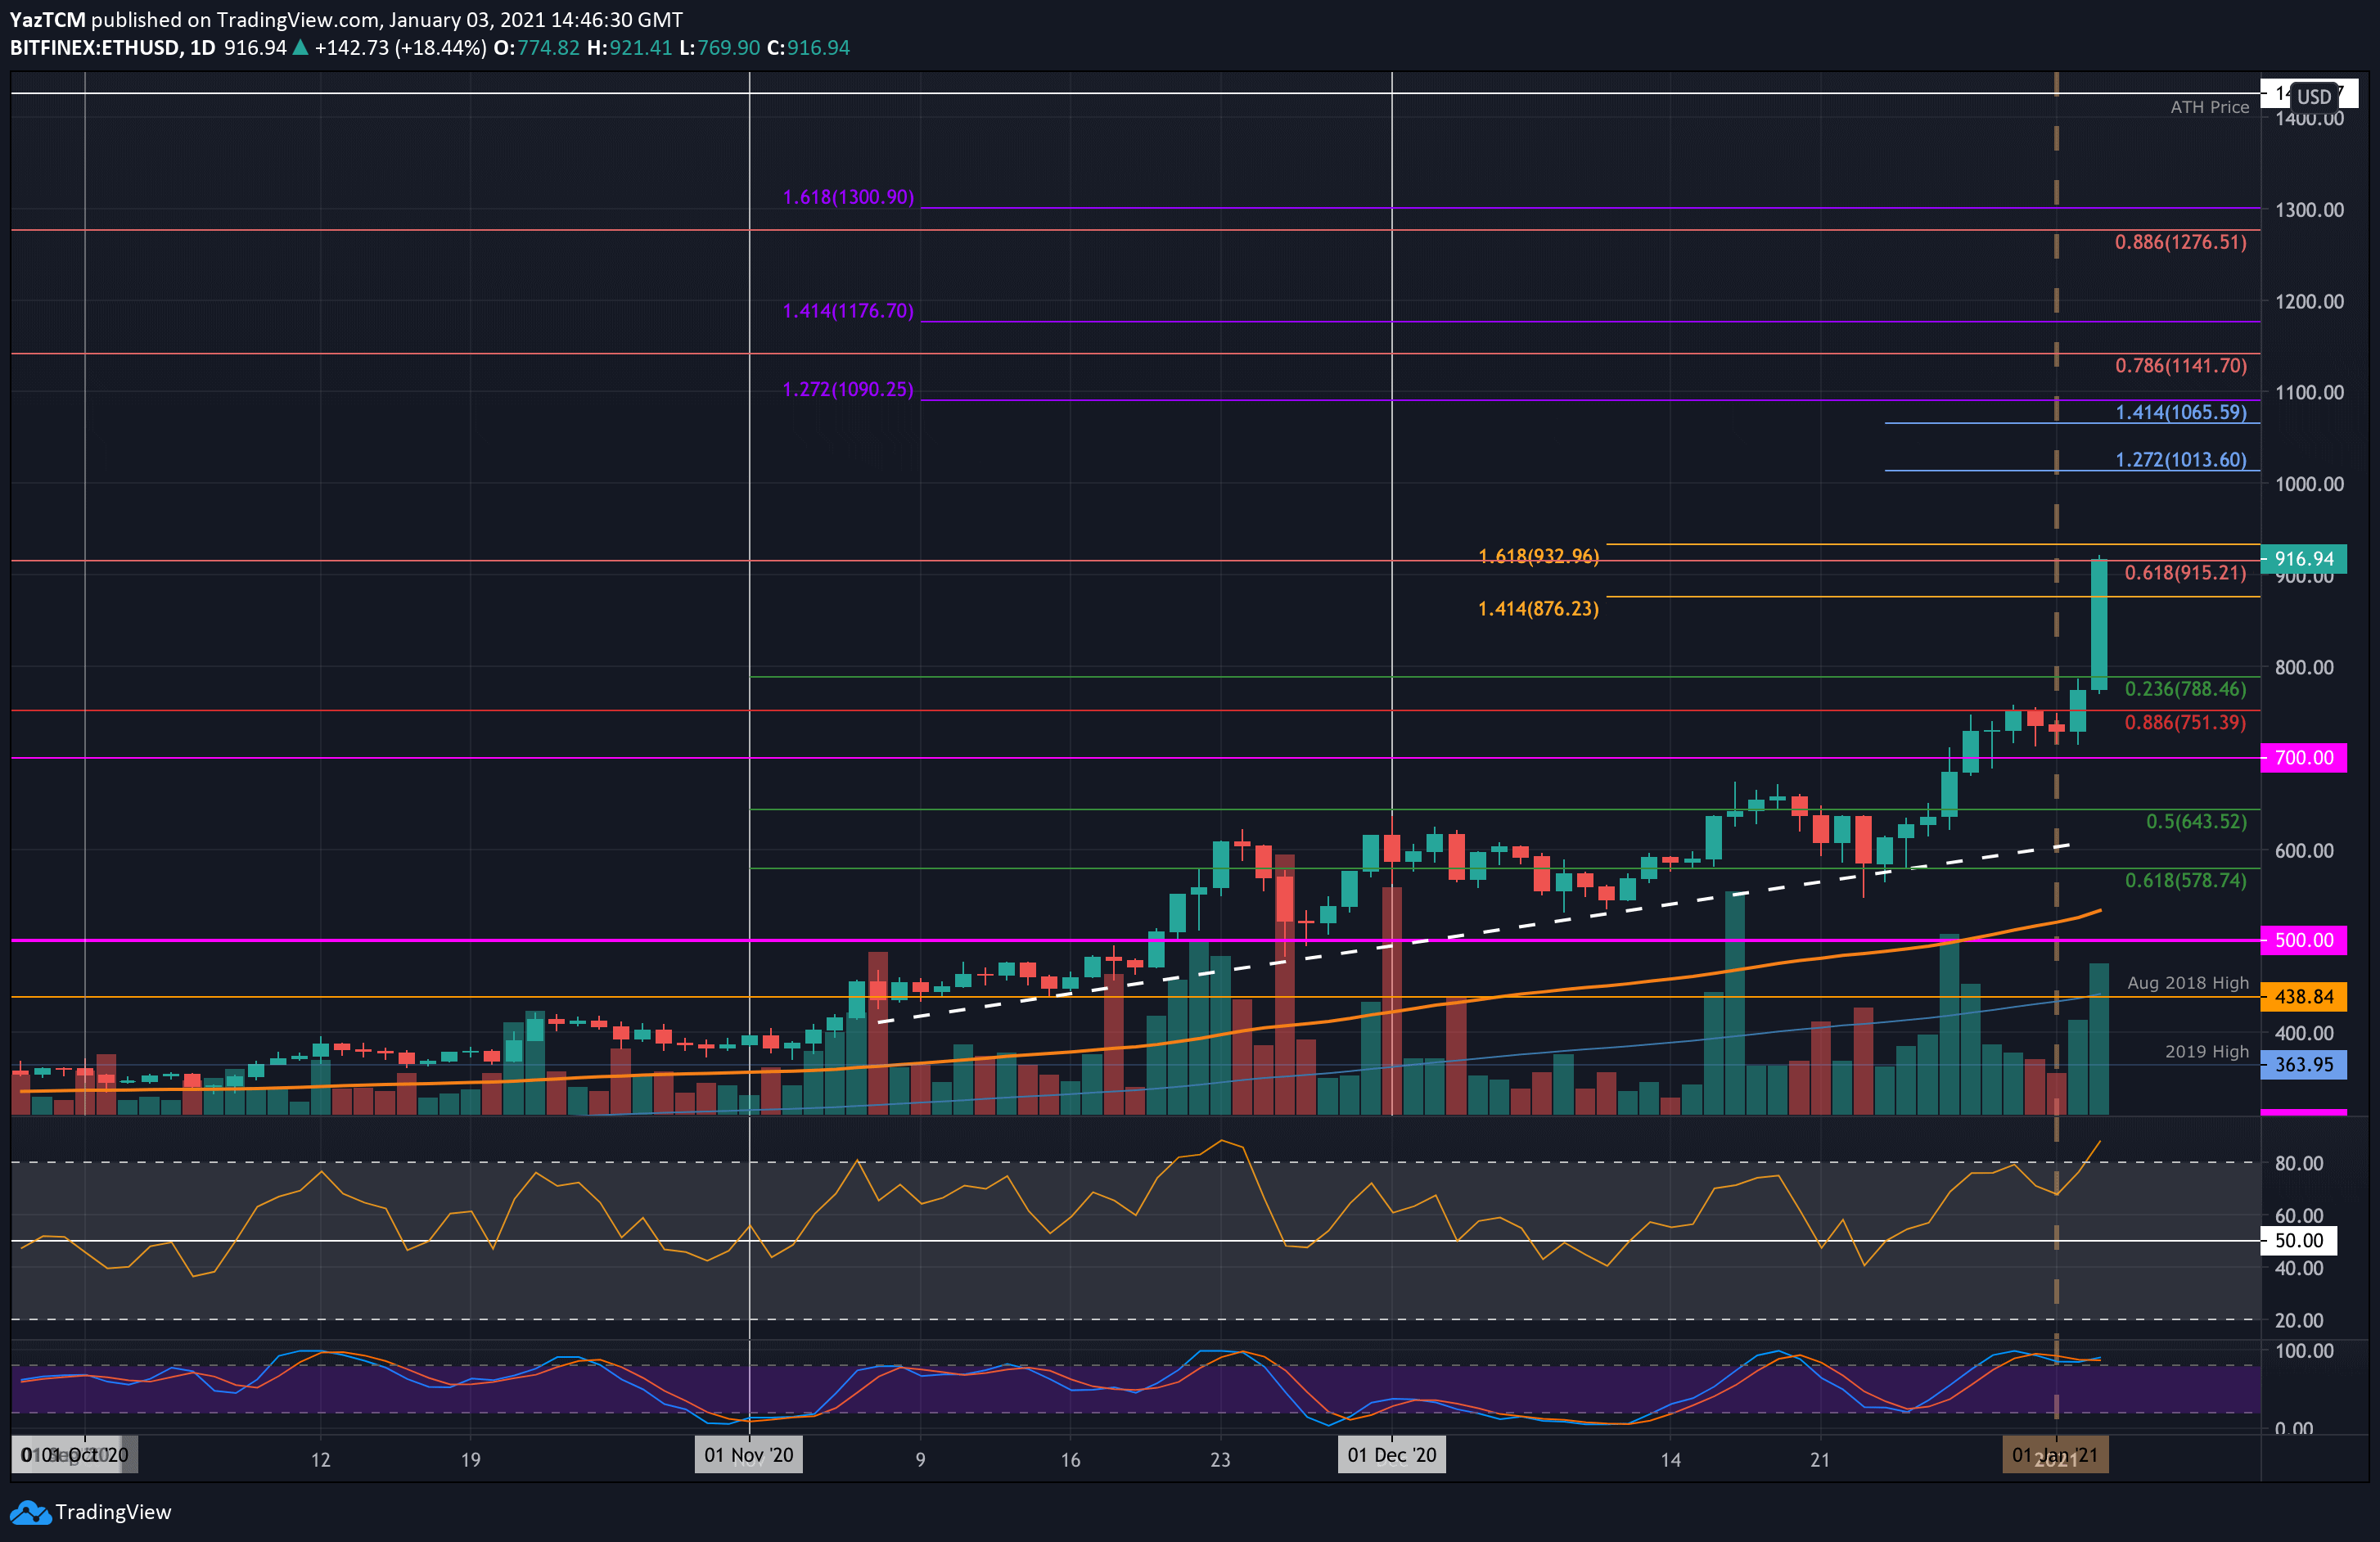 ethereum-price-analysis-following-todays-explosion-can-eth-conquer-1k-soon